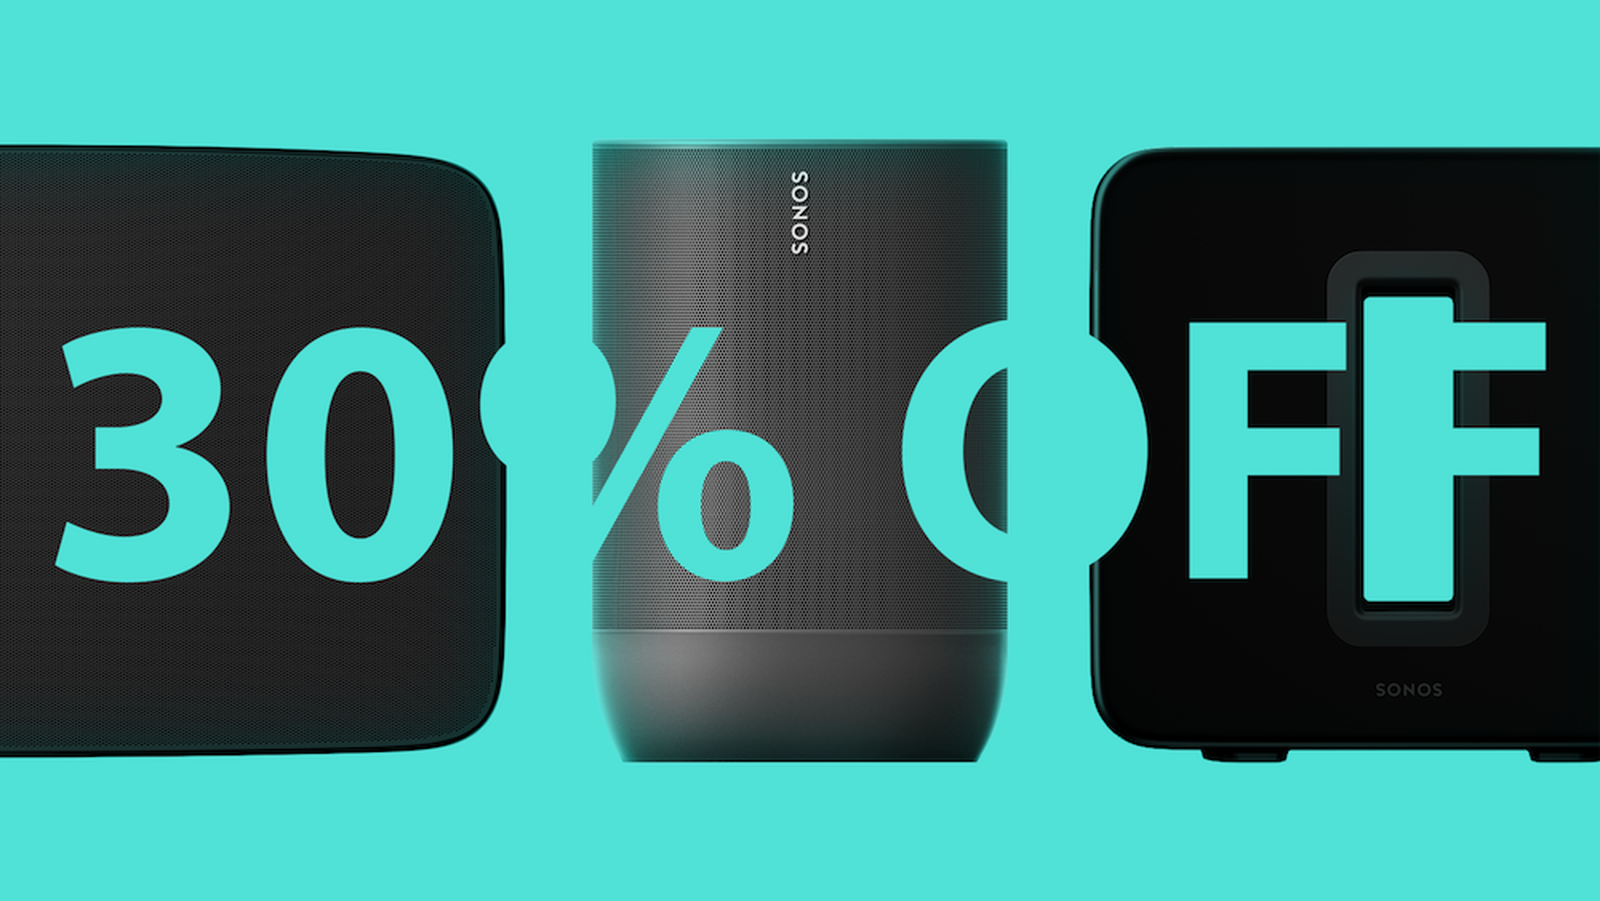 kolbe reservedele offer Deals: Sonos Offers 30% Off Sitewide for Healthcare Workers While Amazon  Discounts iPhone Cases - MacRumors